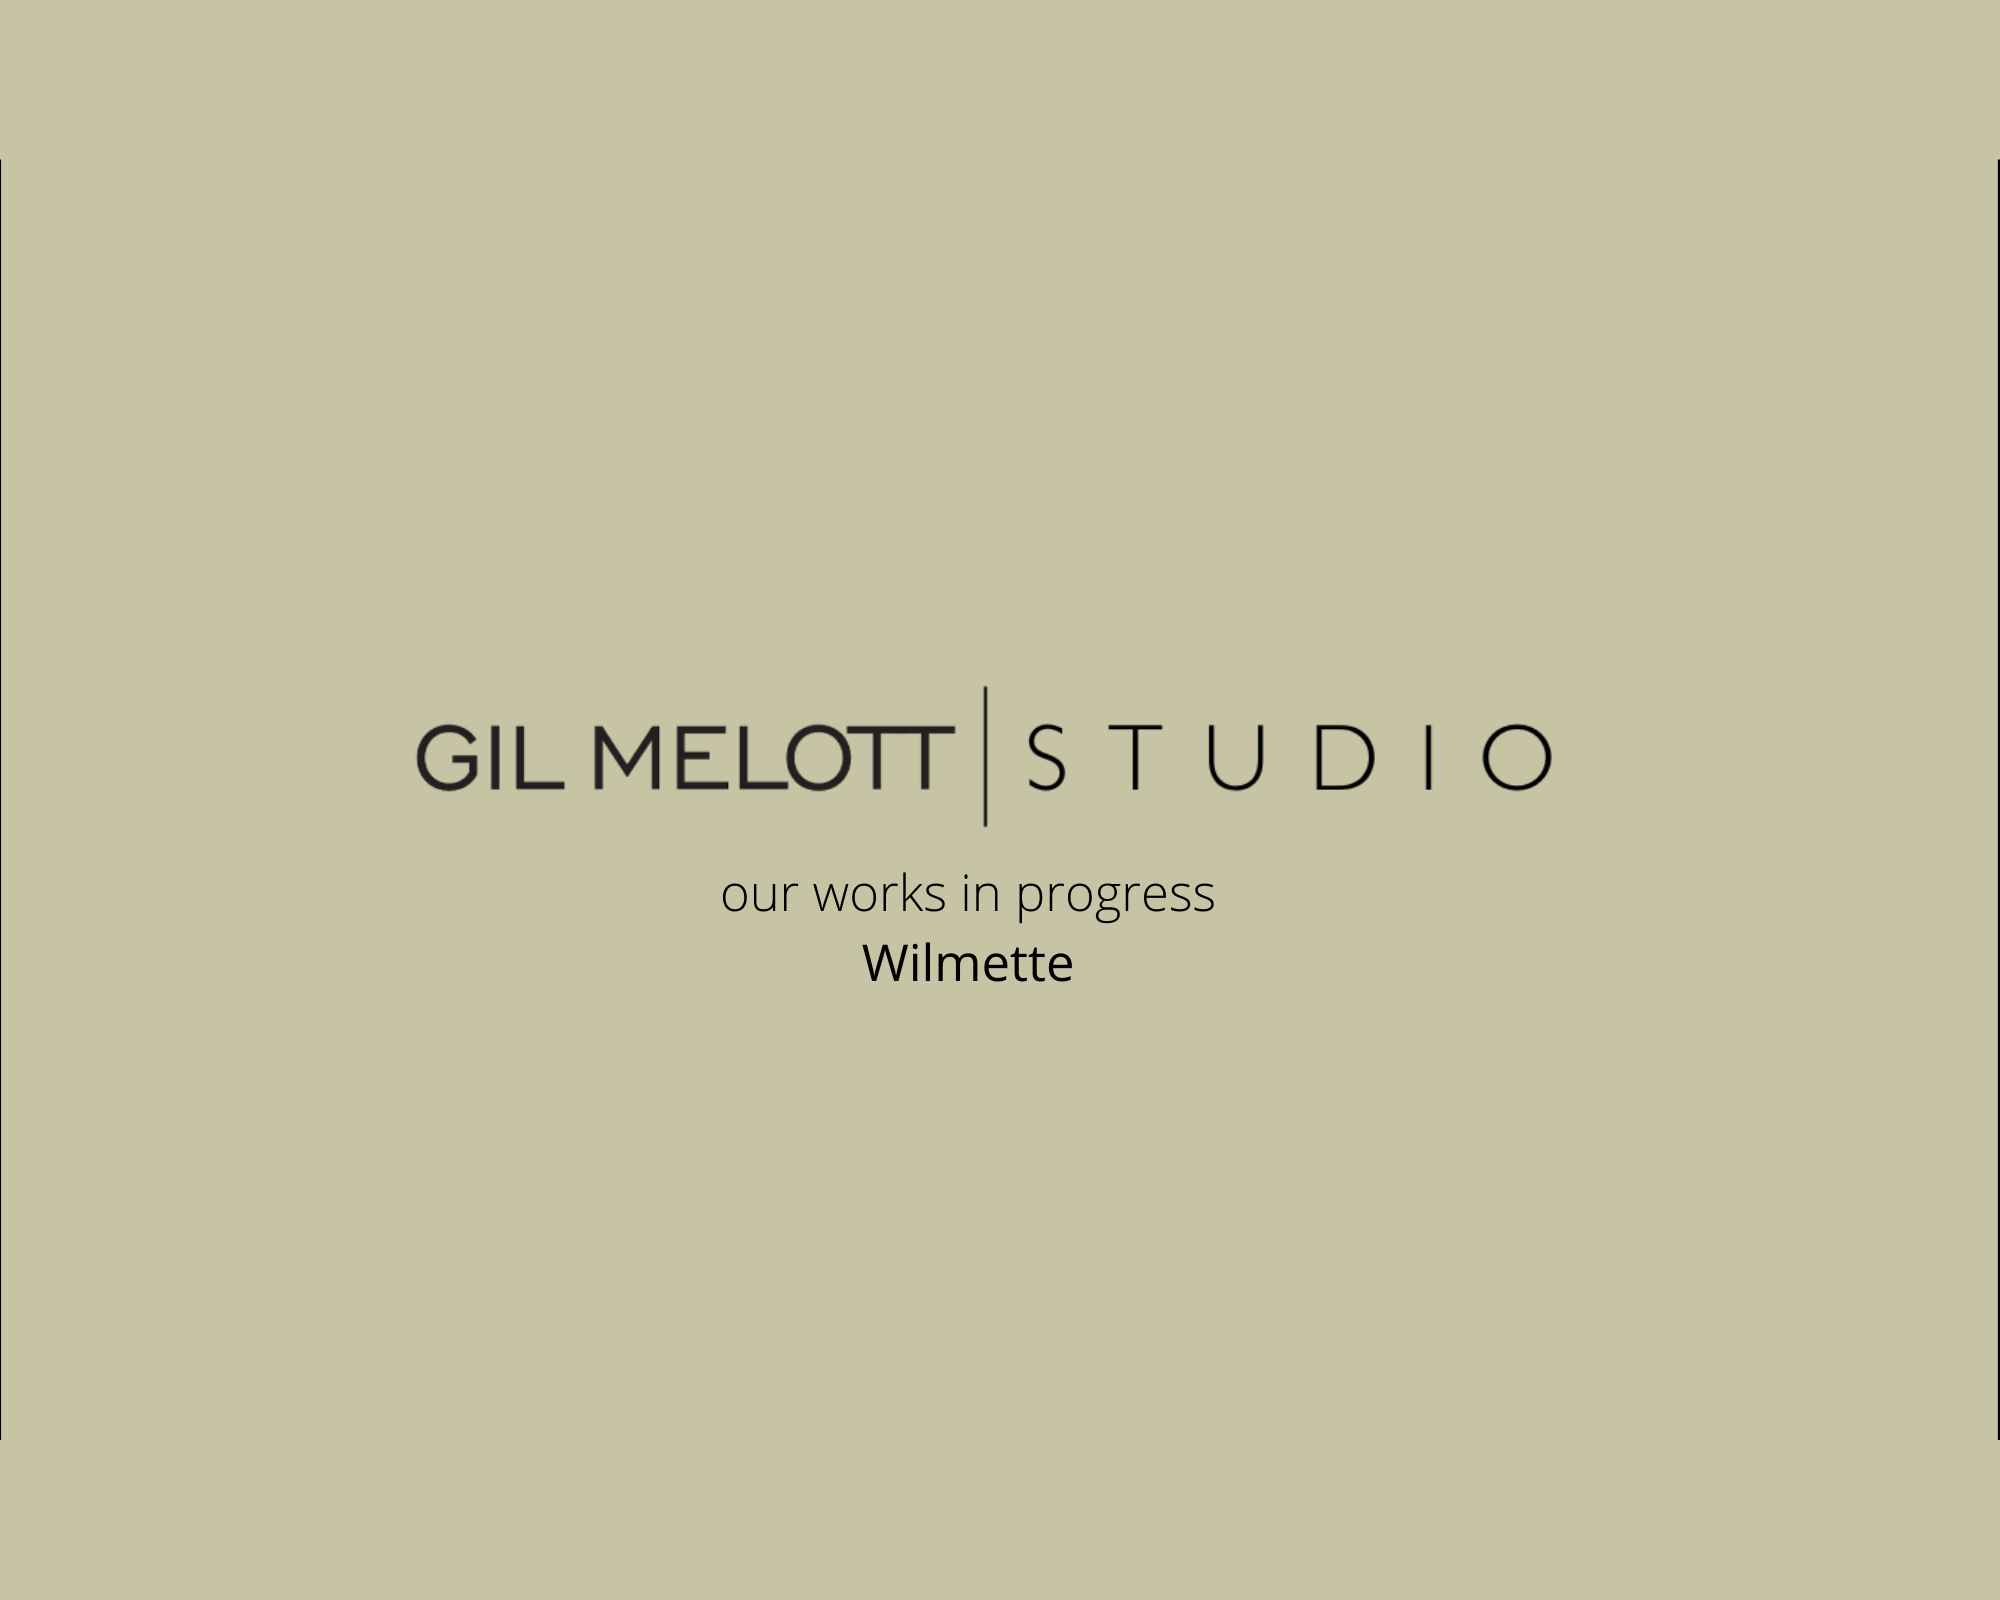 Gil Melott Studio is a luxury creative company focusing on high end residential and boutique hospitality interiors. Gil Melott Studio has been recognized for an unapologetic approach to integrating eras and styles in-14.png